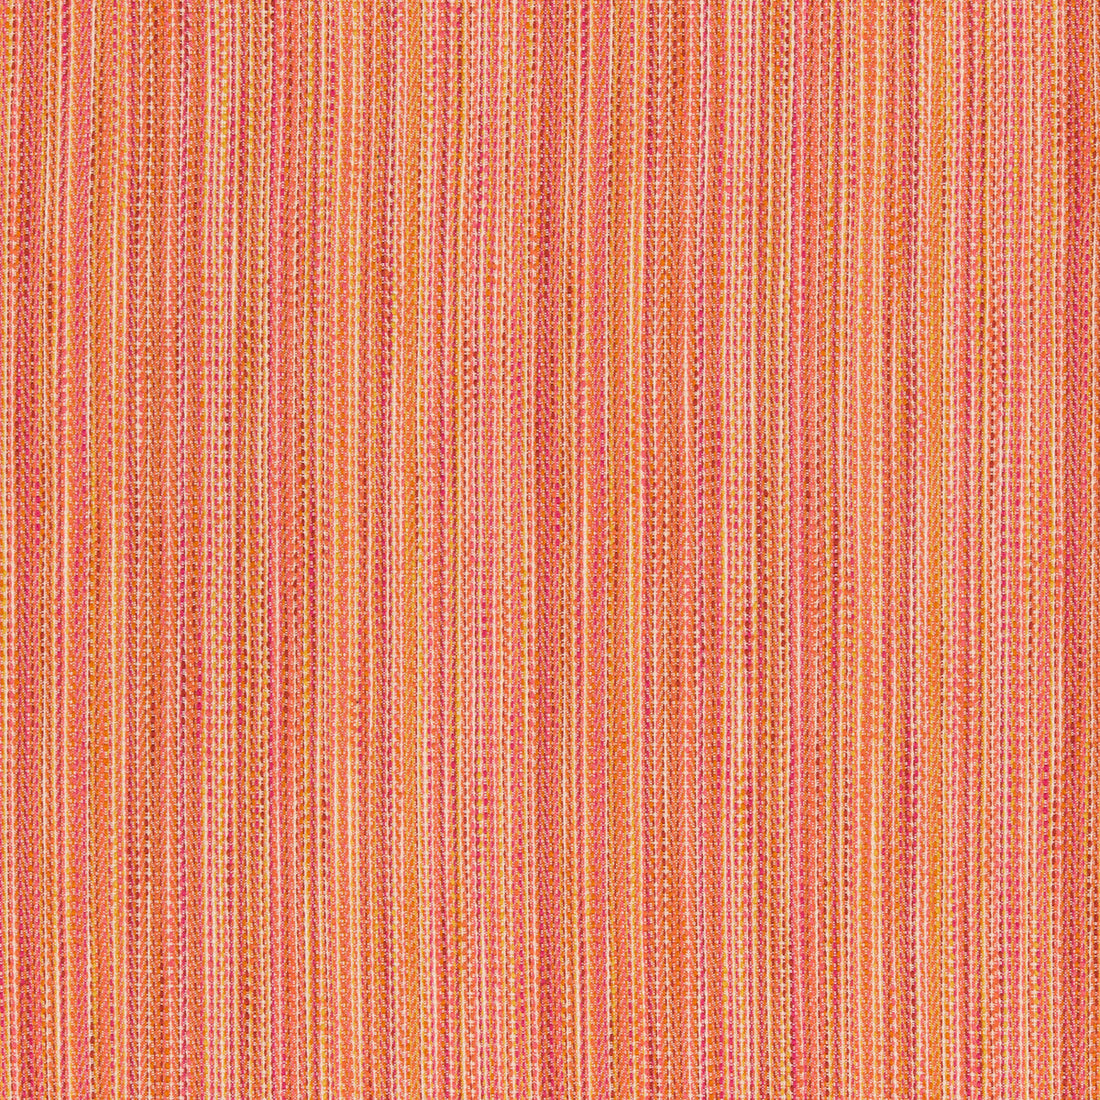 Kravet Design fabric in 36077-719 color - pattern 36077.719.0 - by Kravet Design in the Inside Out Performance Fabrics collection